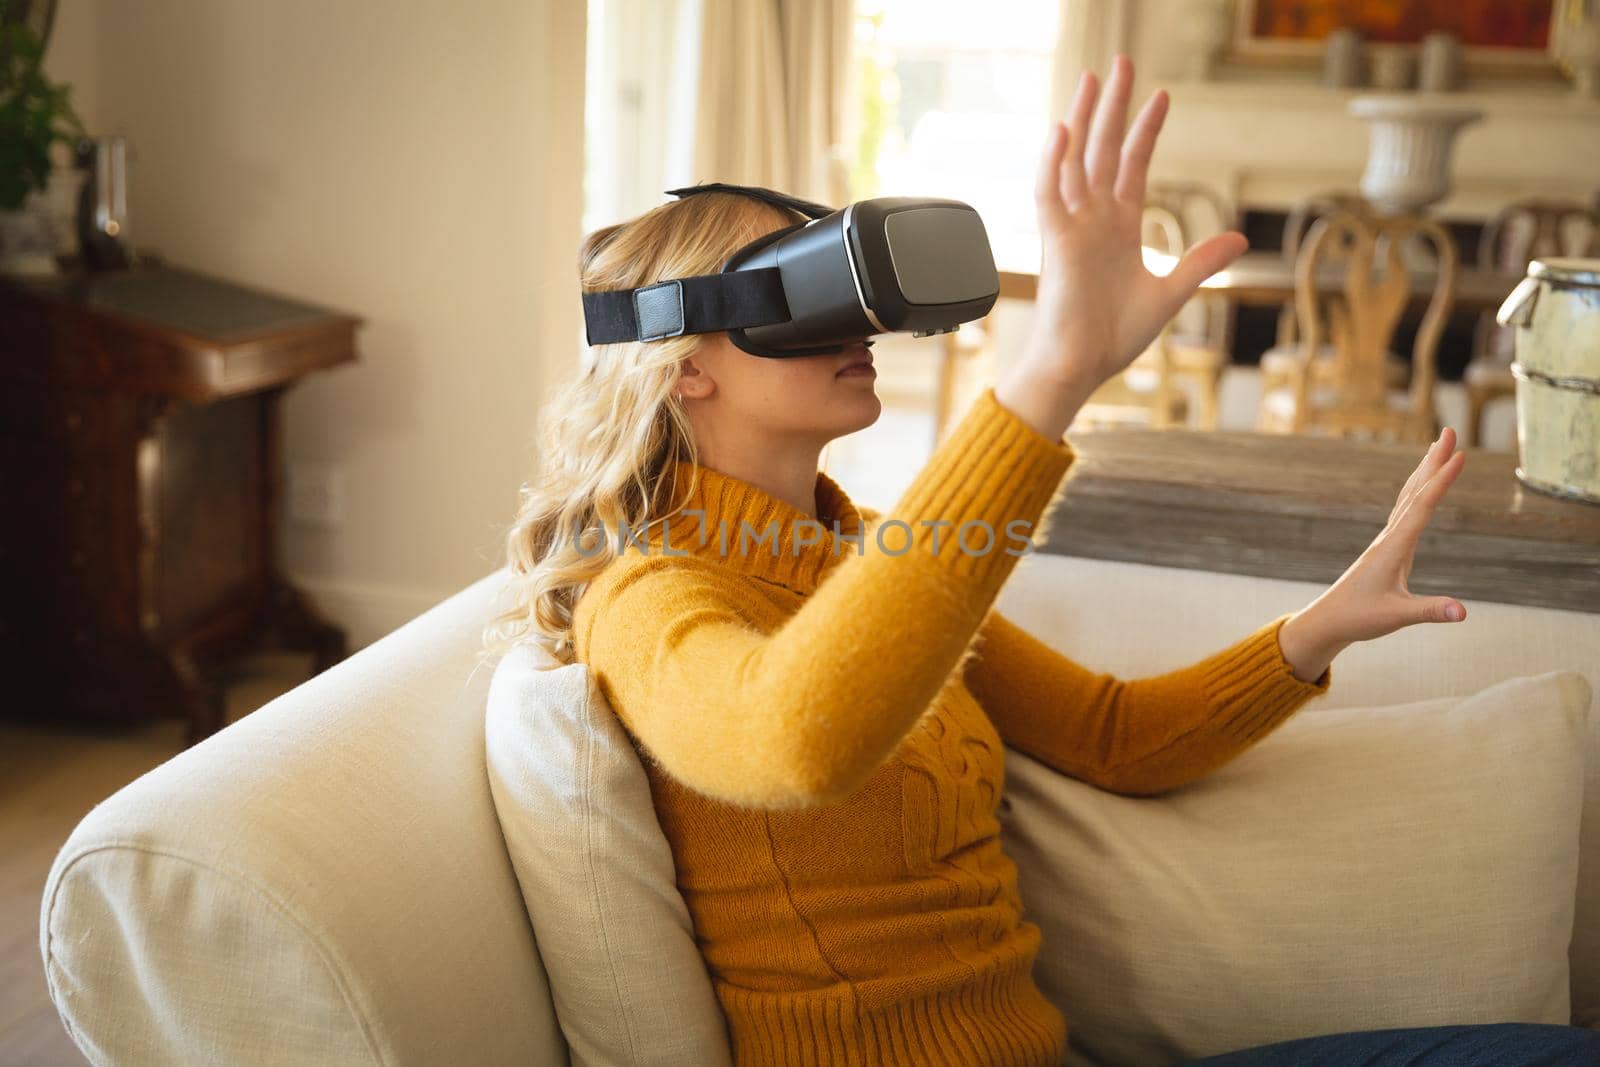 Caucasian woman sitting on couch in luxury living room wearing vr headset, with hands raised. spending free time at home with technology.